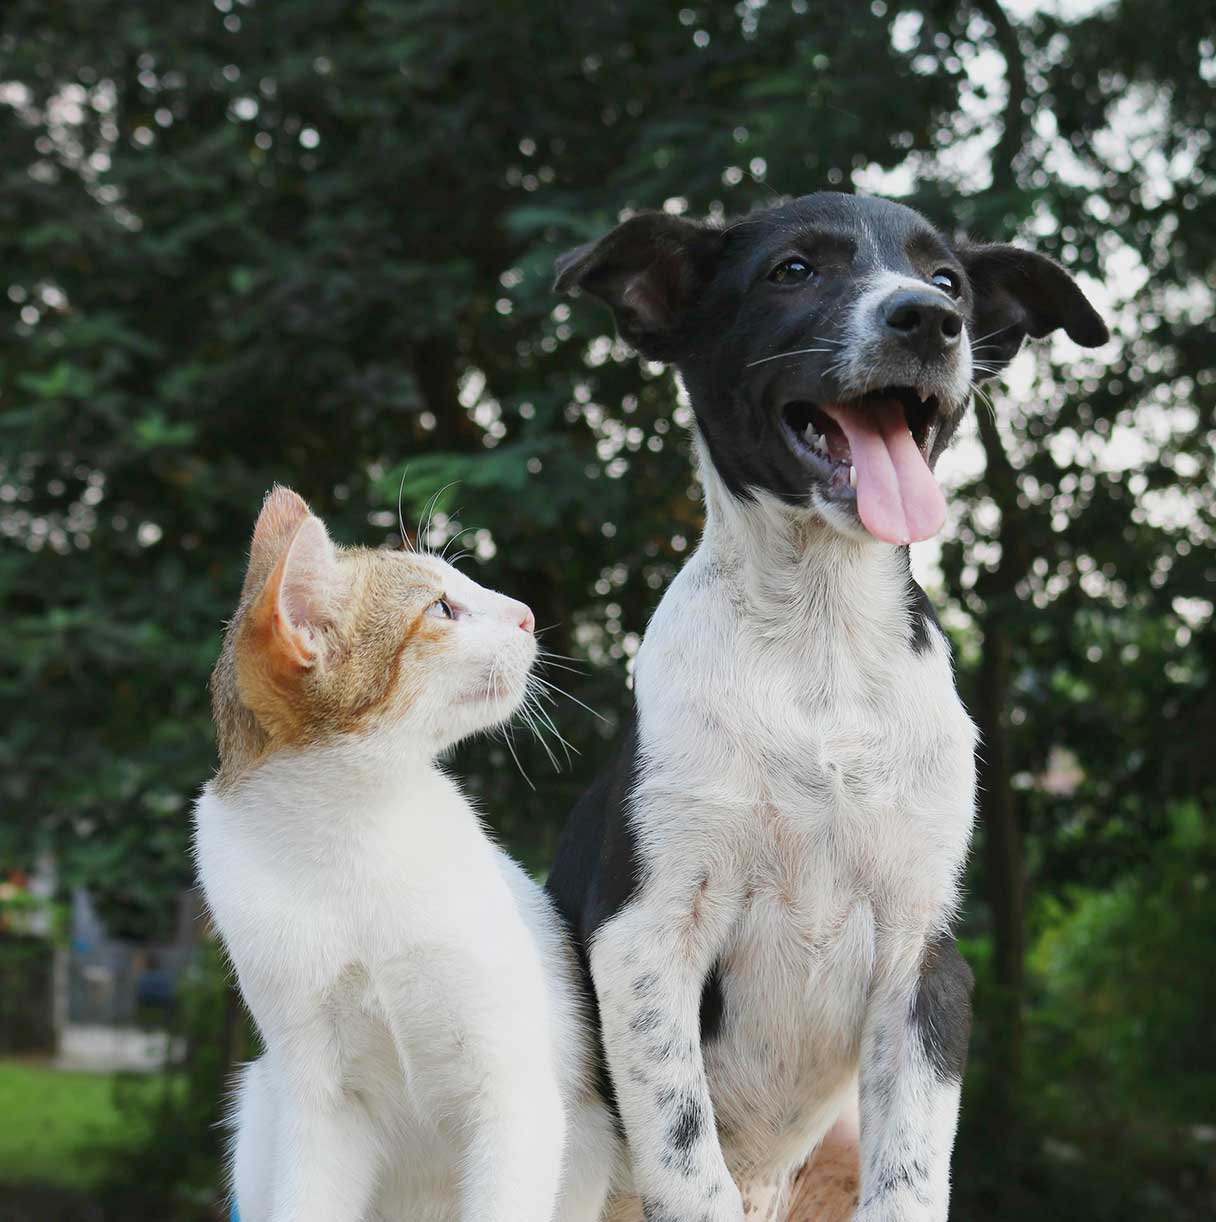 Close-up of a cat and dog